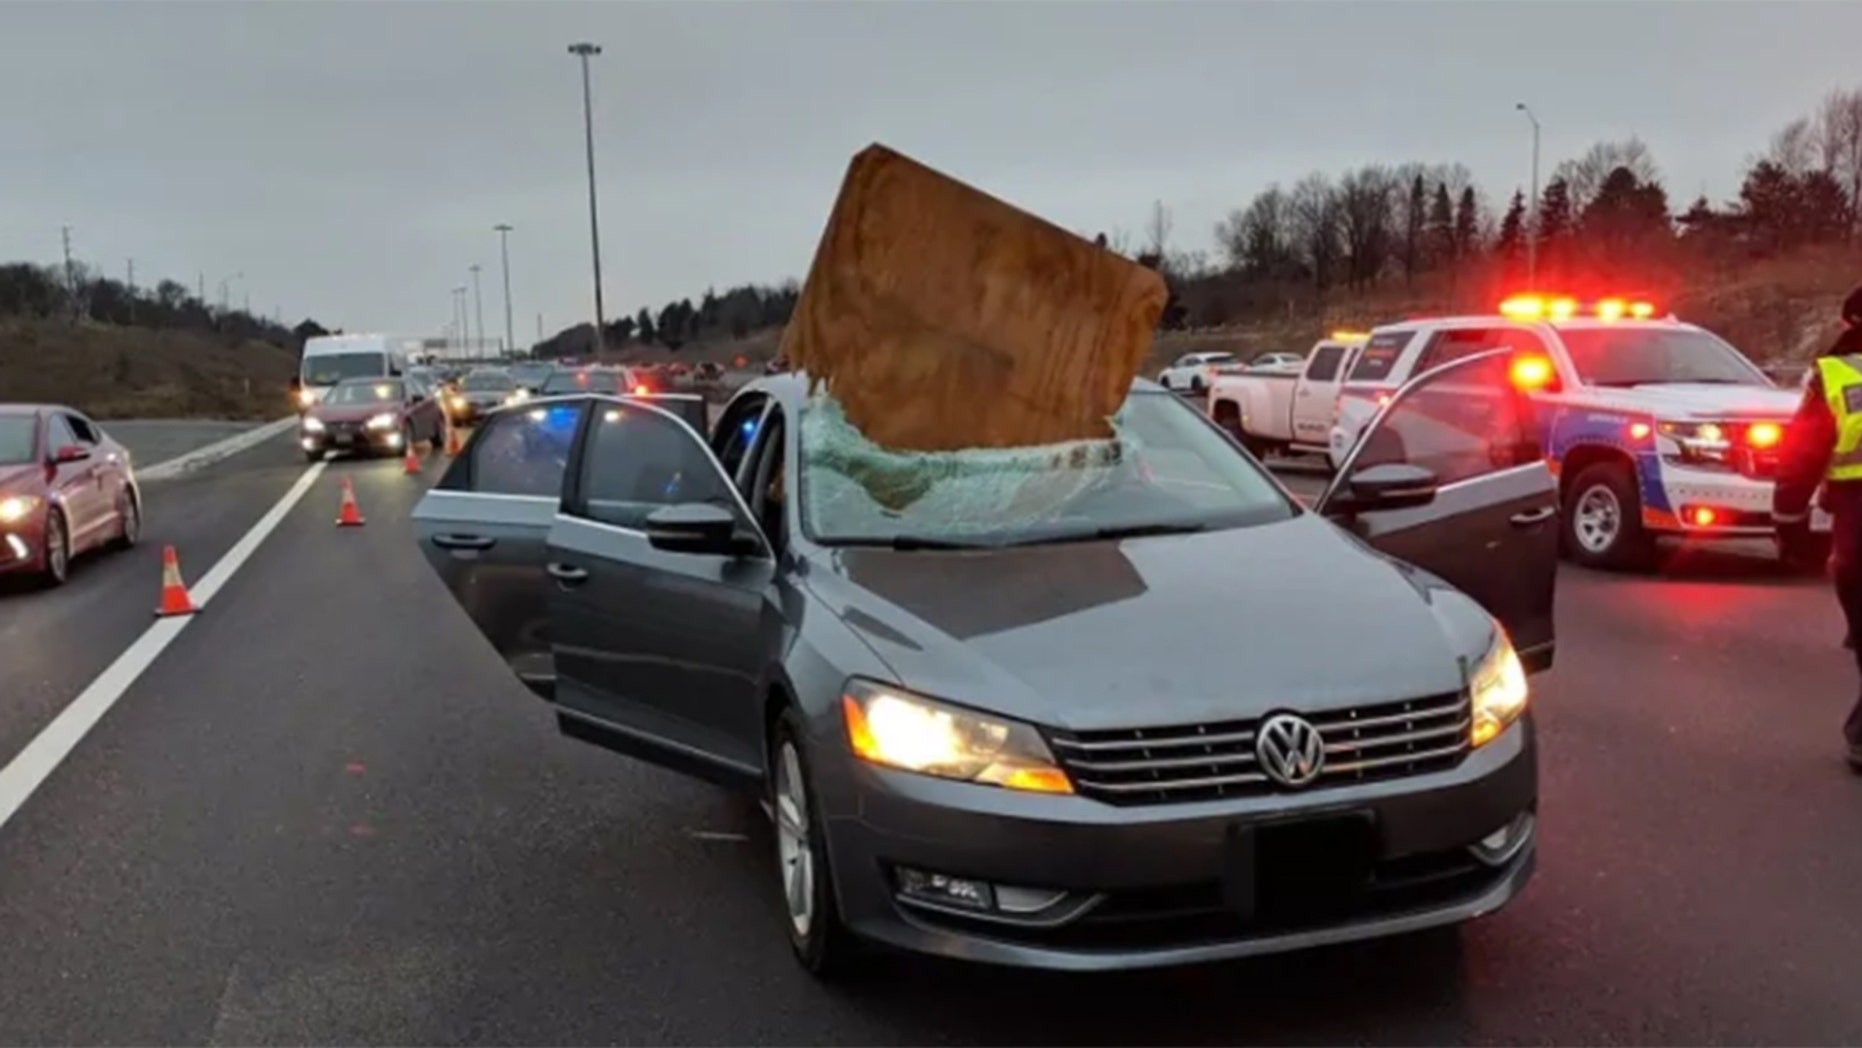 Cutting it close: Car impaled by flying piece of plywood